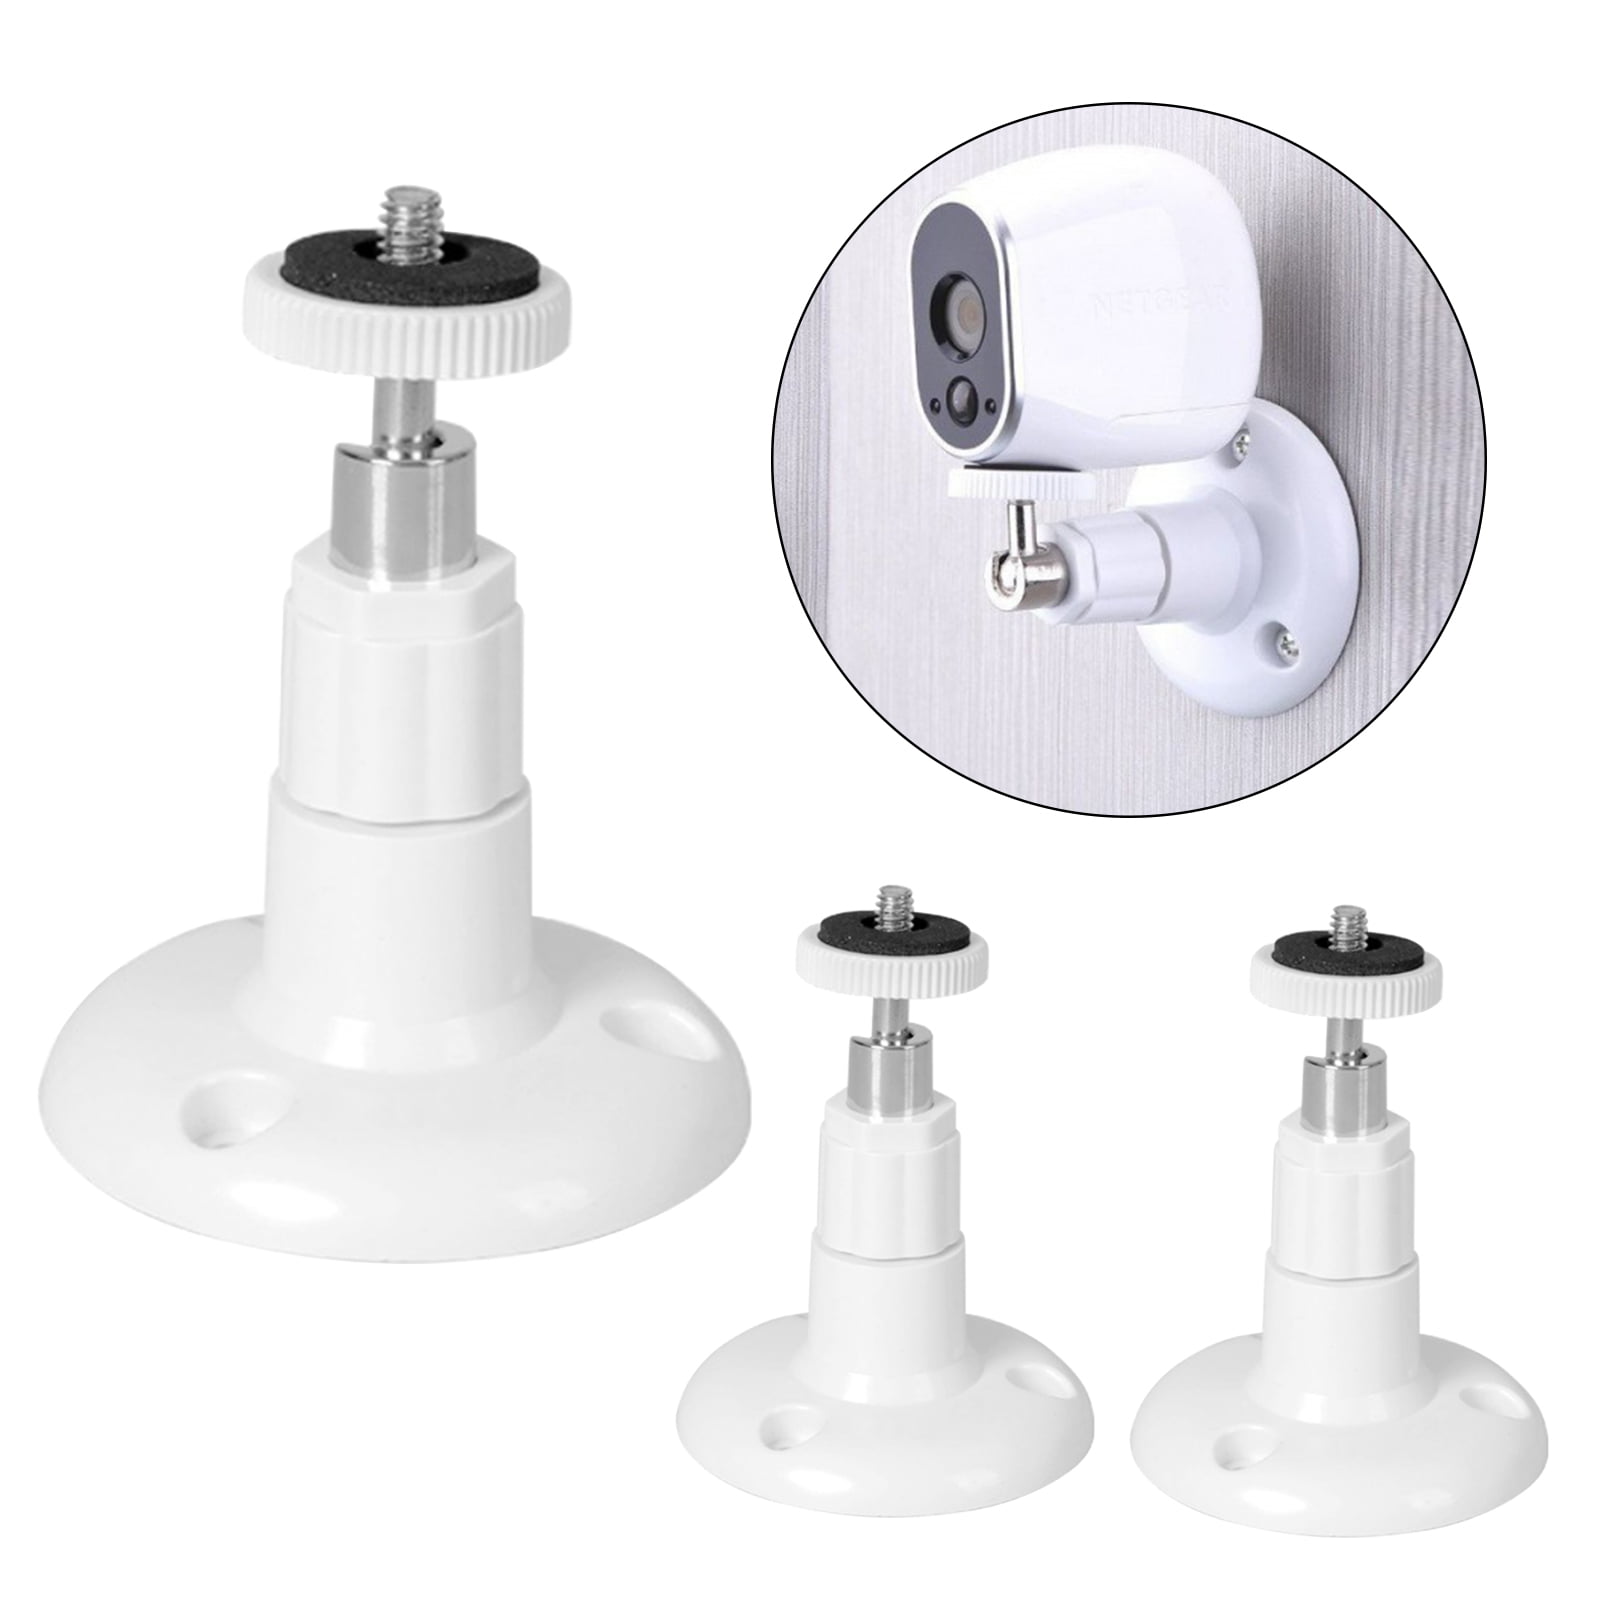 INSTEN 3 Pack Security Wall Adjustable Mount Bracket Pro 3 Pro 2 Other 1/4 Screw Camera Models Works with Outdoor Indoor Ceiling Wall Mounting White Compatible with Arlo Arlo Pro 